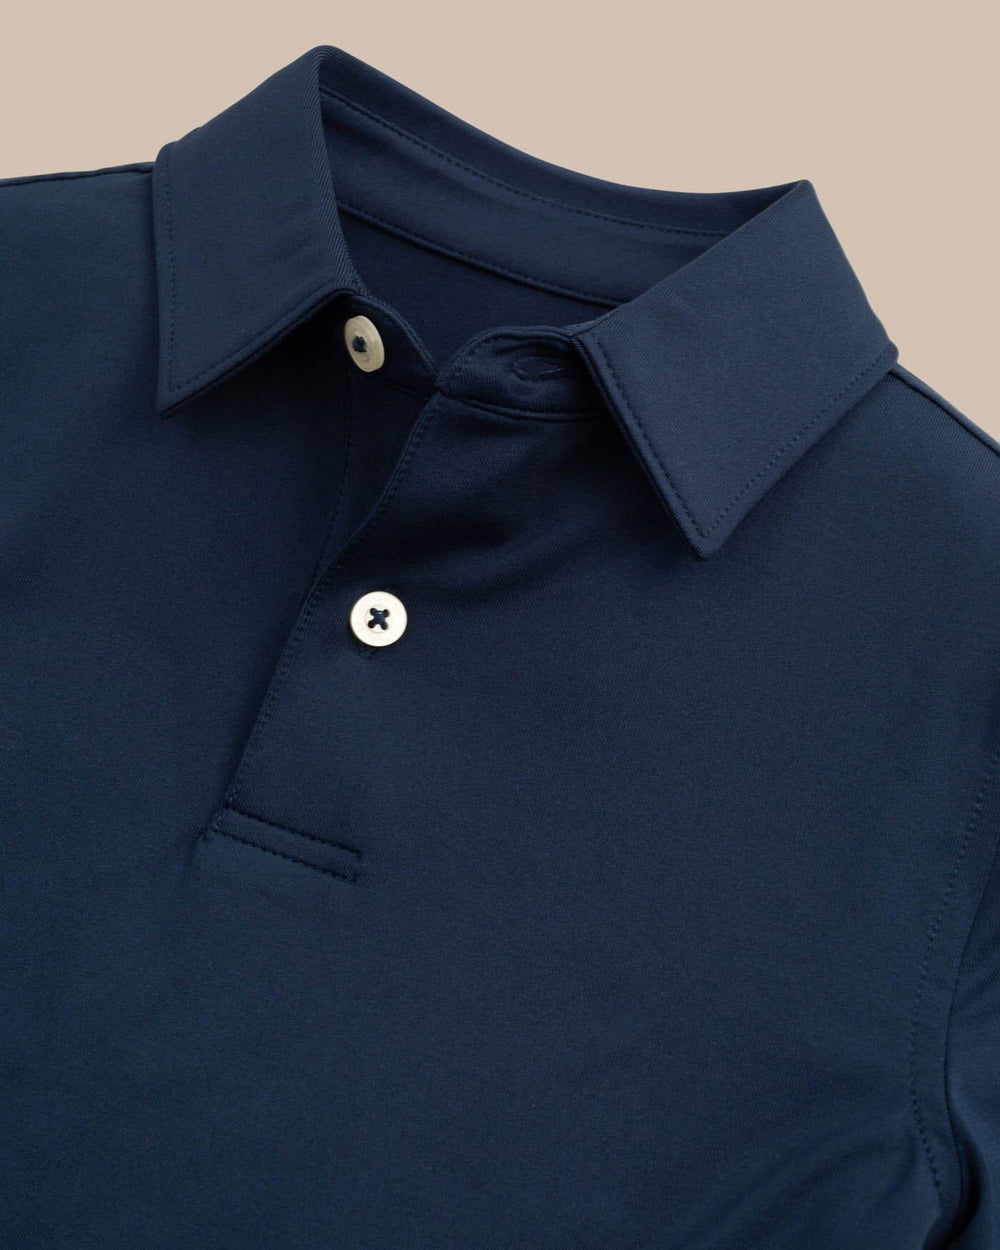 The detail view of the Boys Driver Performance Polo Shirt by Southern Tide - True Navy